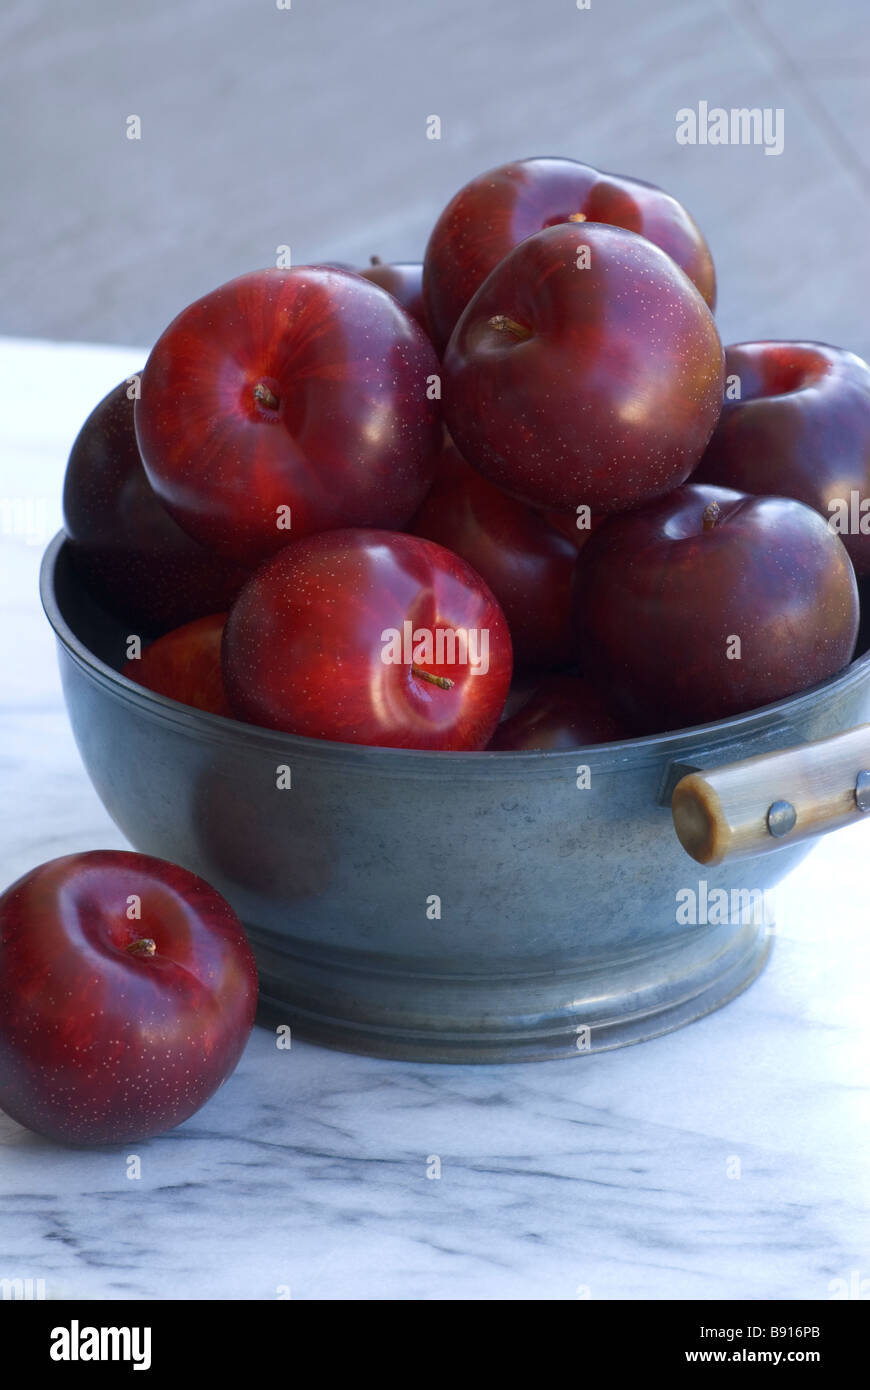 Plums in a bowl Stock Photo